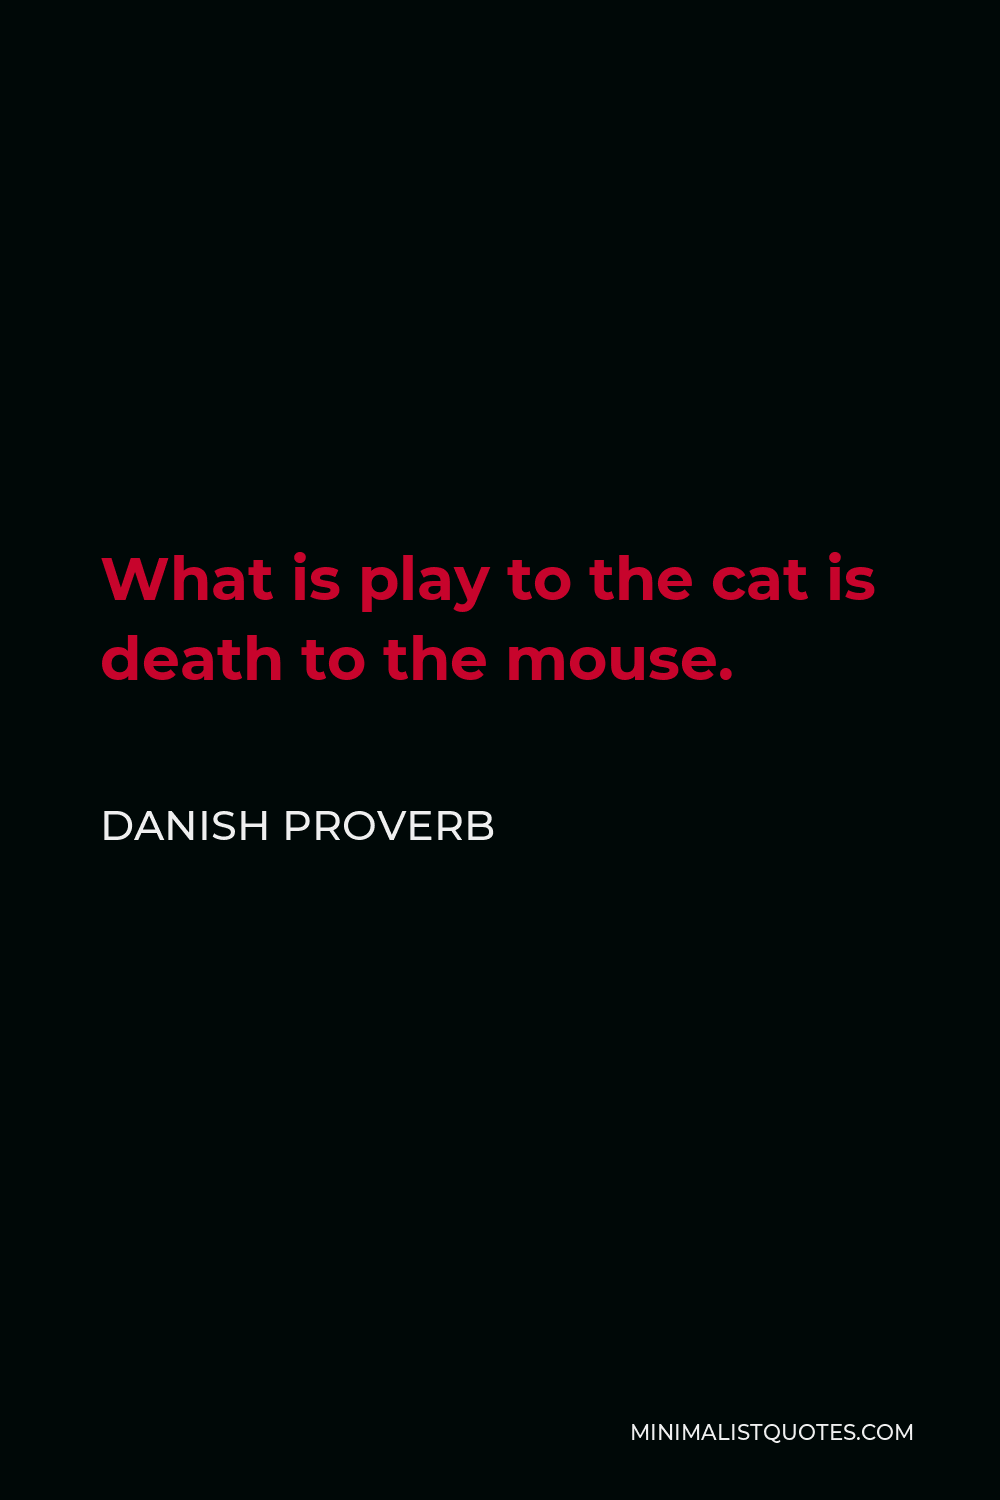 Danish Proverb Quote - What is play to the cat is death to the mouse.